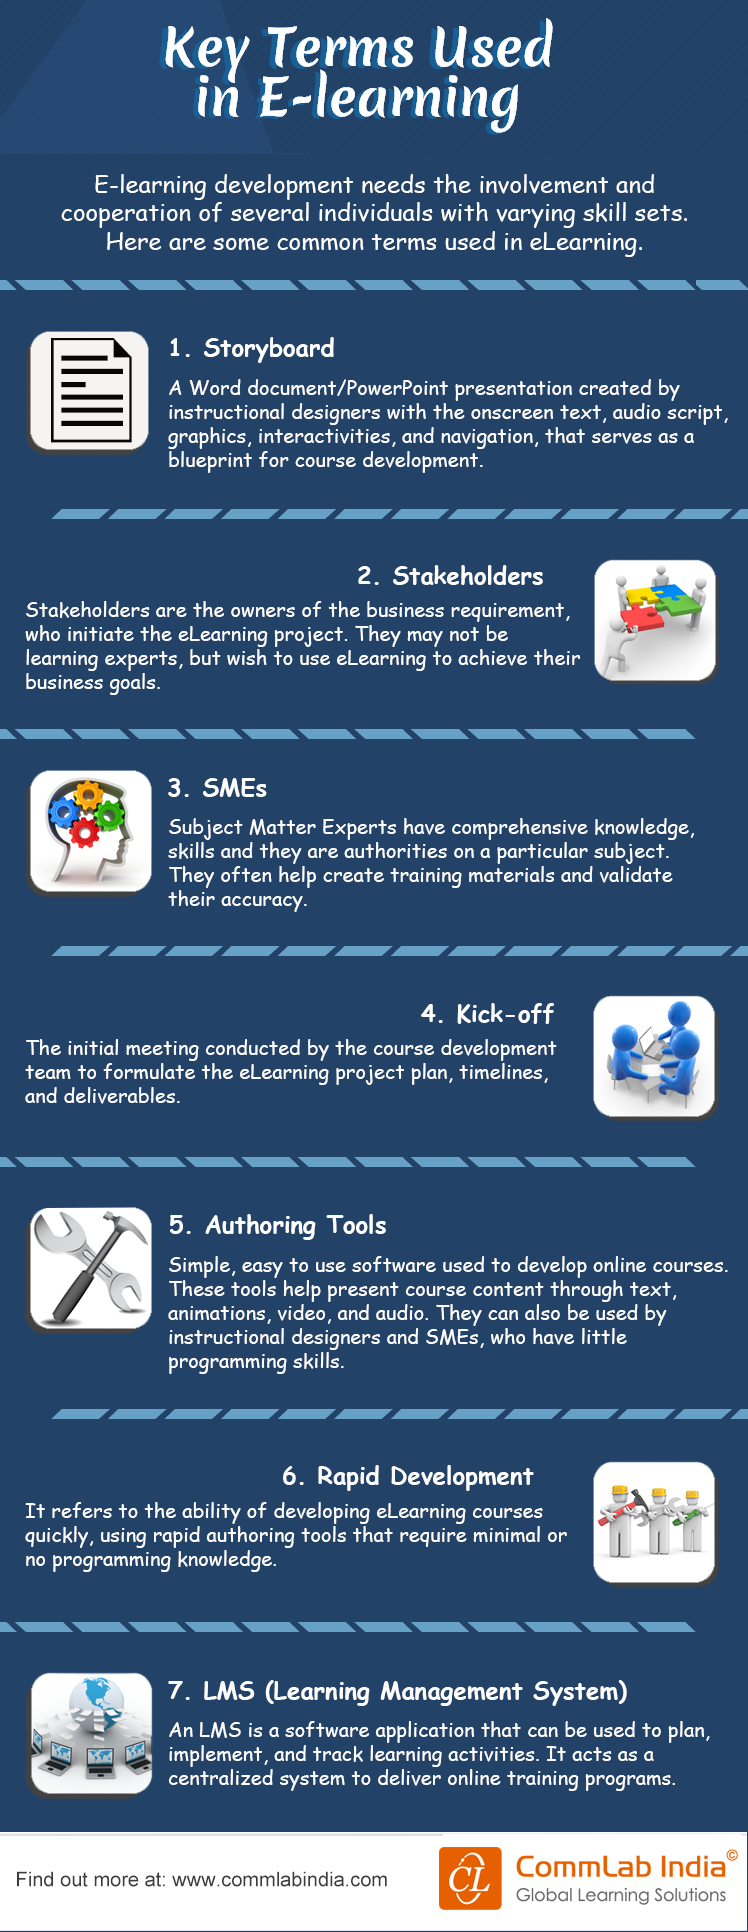 Key Terms Used in E-learning [Infographic]